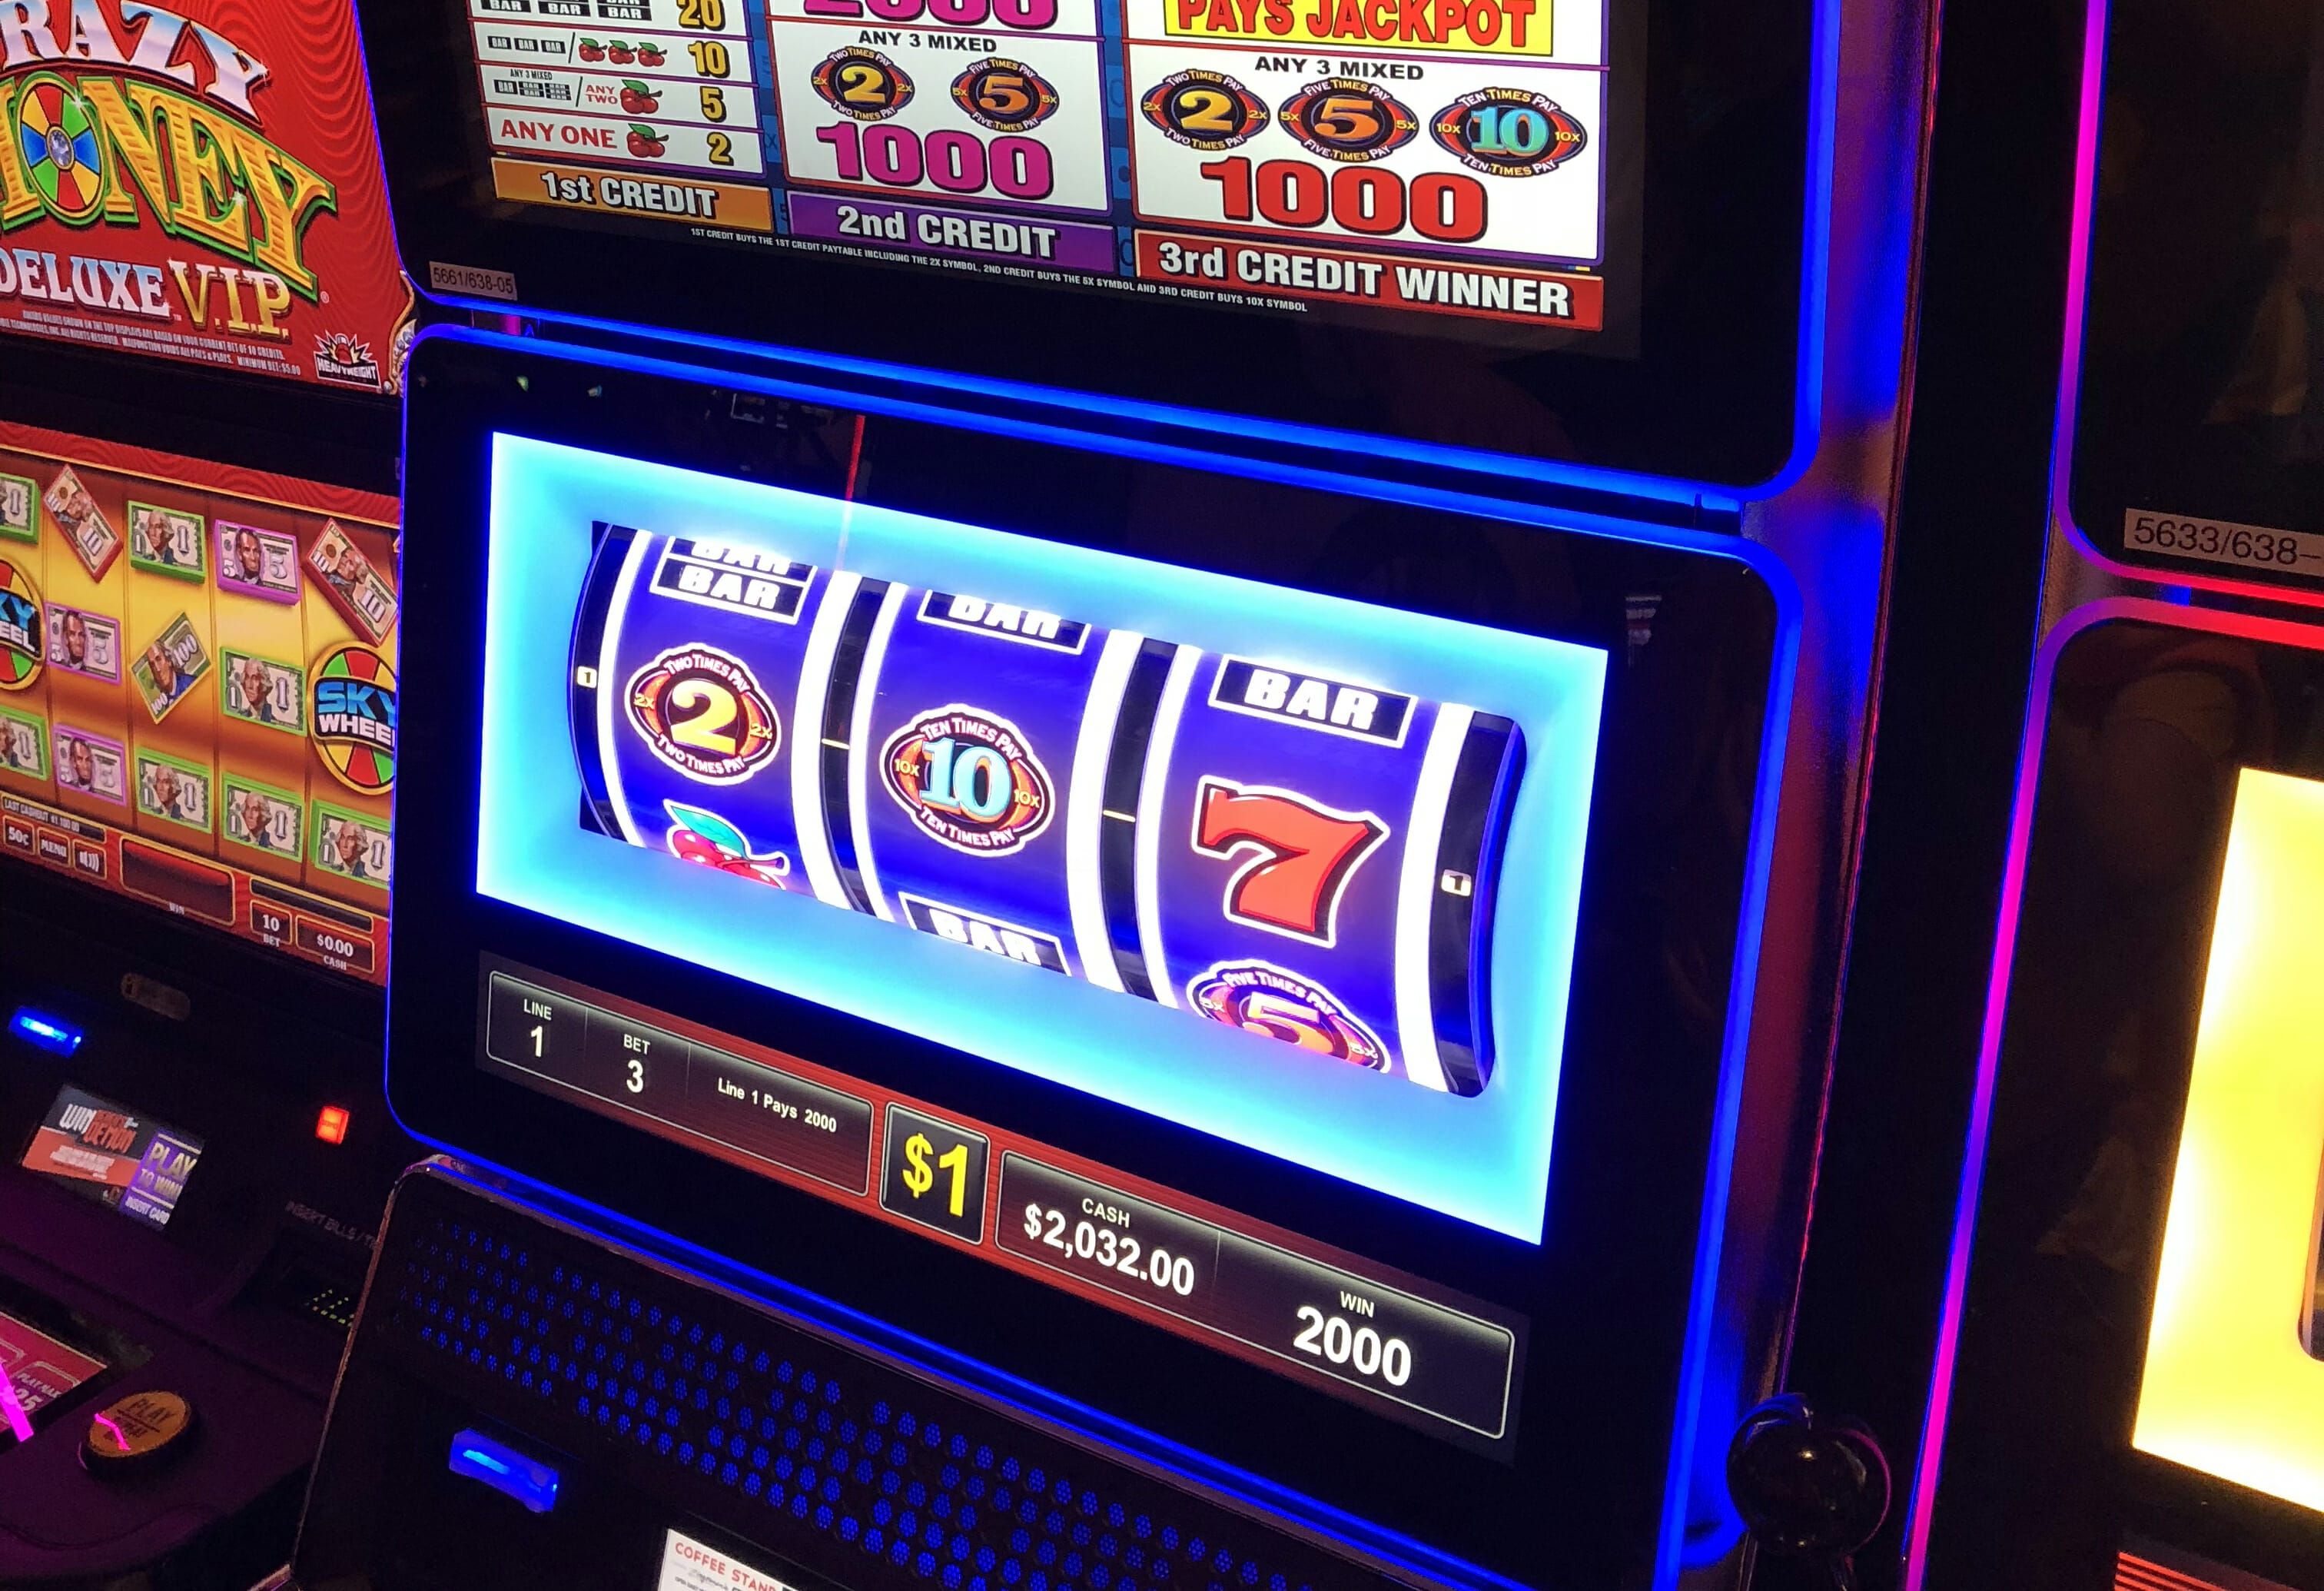 How Much Tax Does New York Take Slot Machine Jackpot